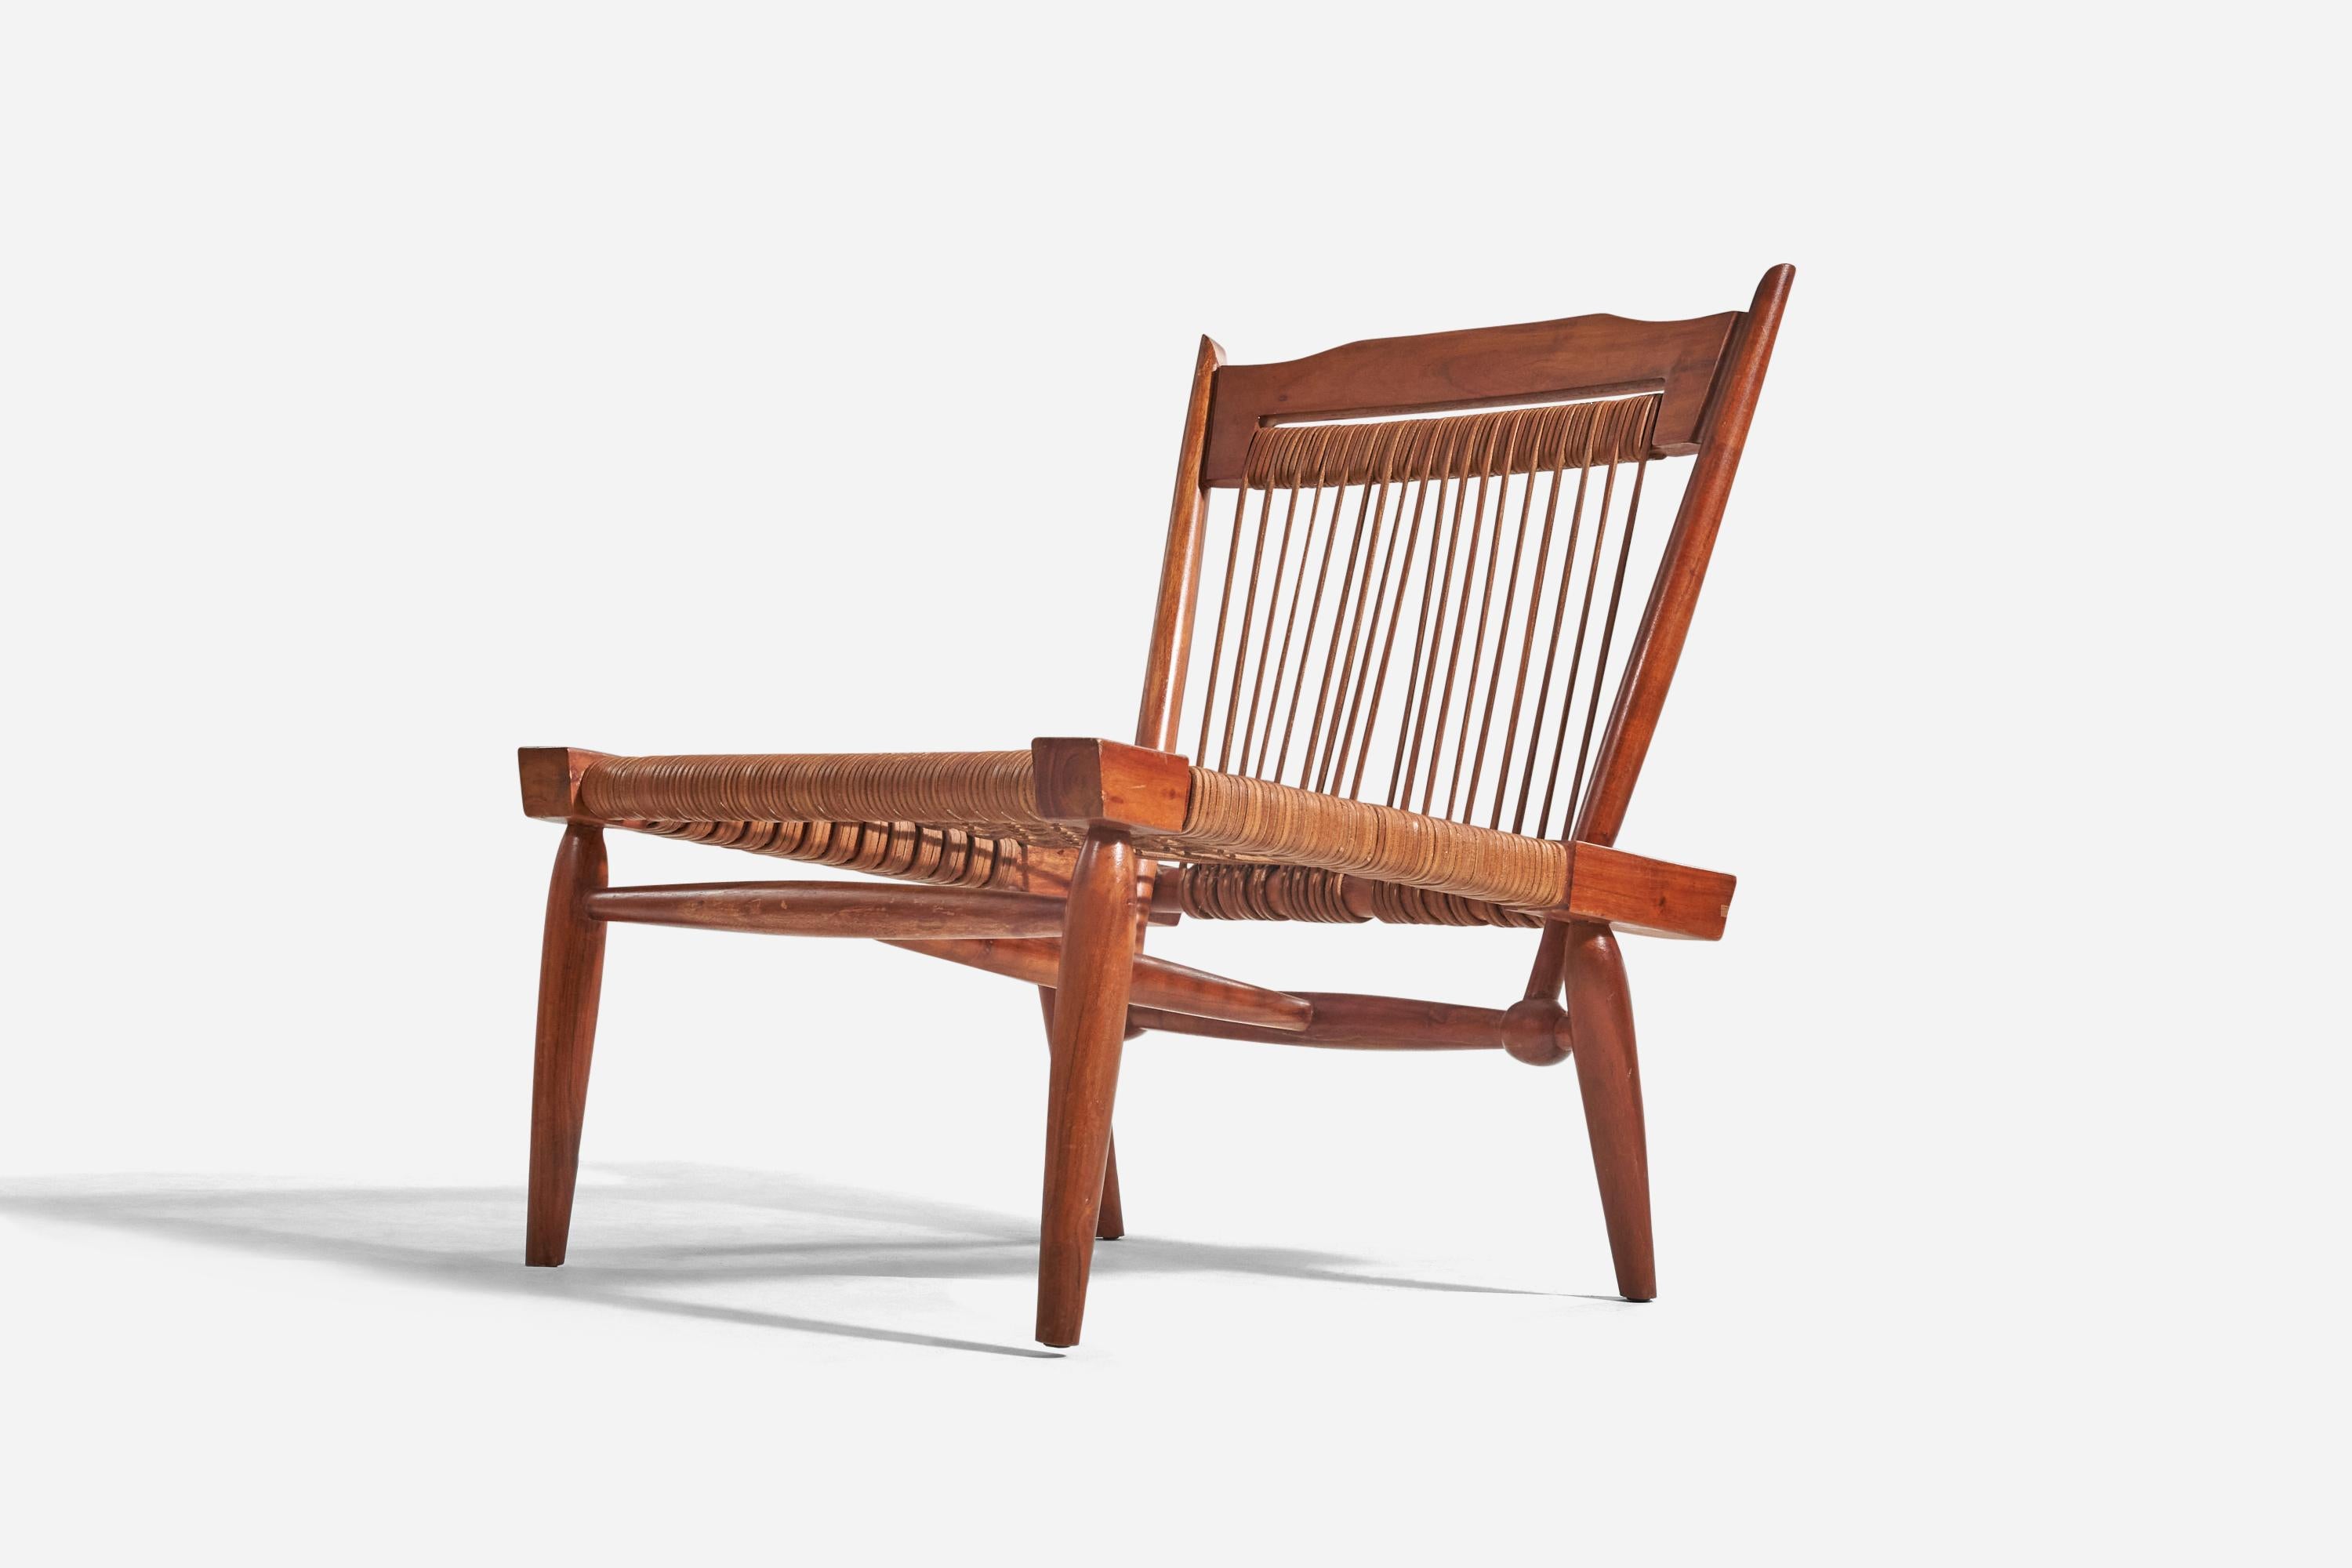 Mid-Century Modern American Designer, Lounge Chair, Walnut, Cane, United States, 1960s For Sale